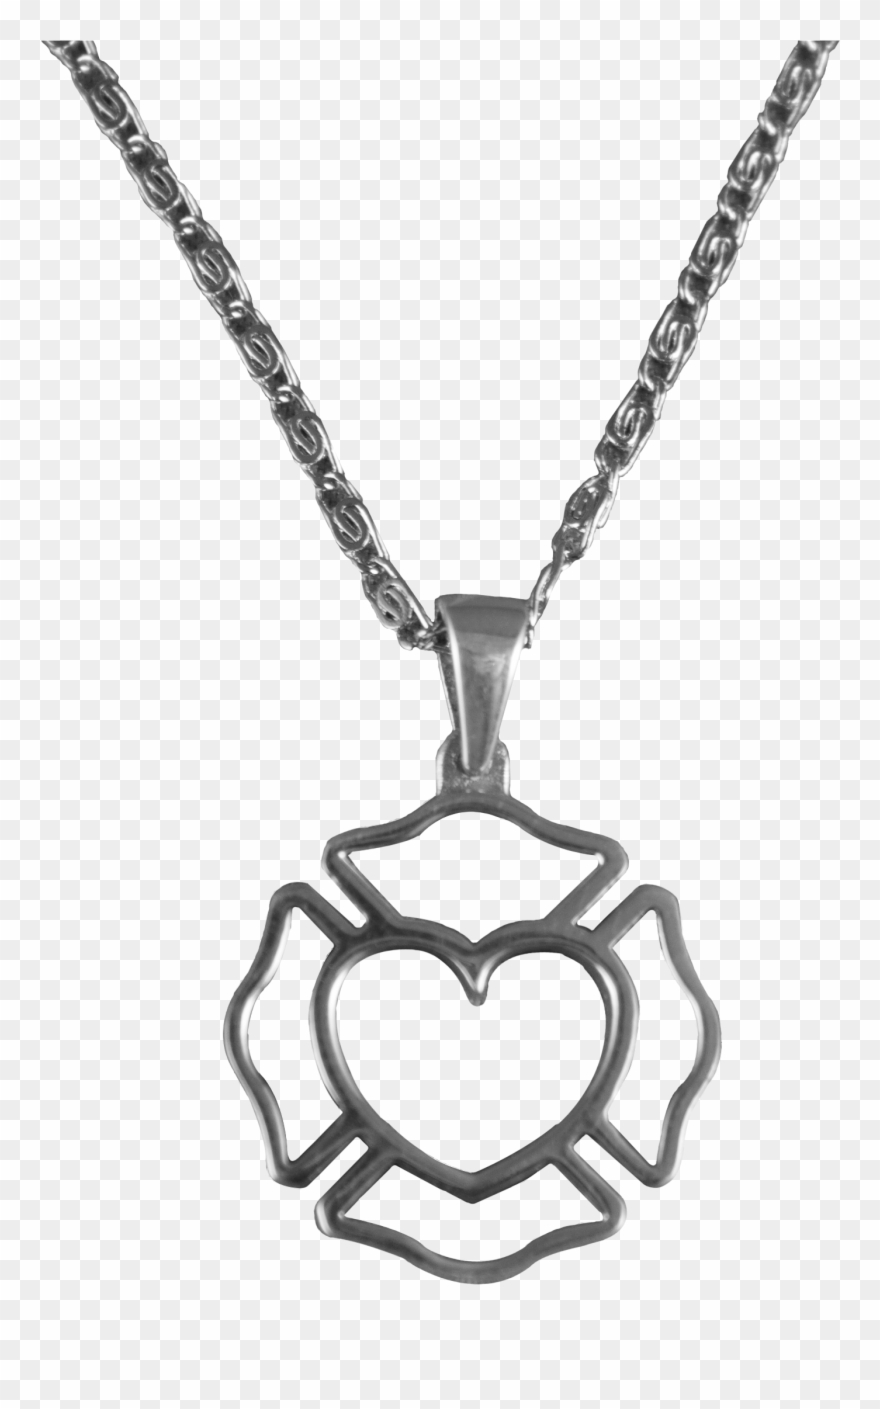 Cross Outline Maltese Cross Outline With Heart Necklace